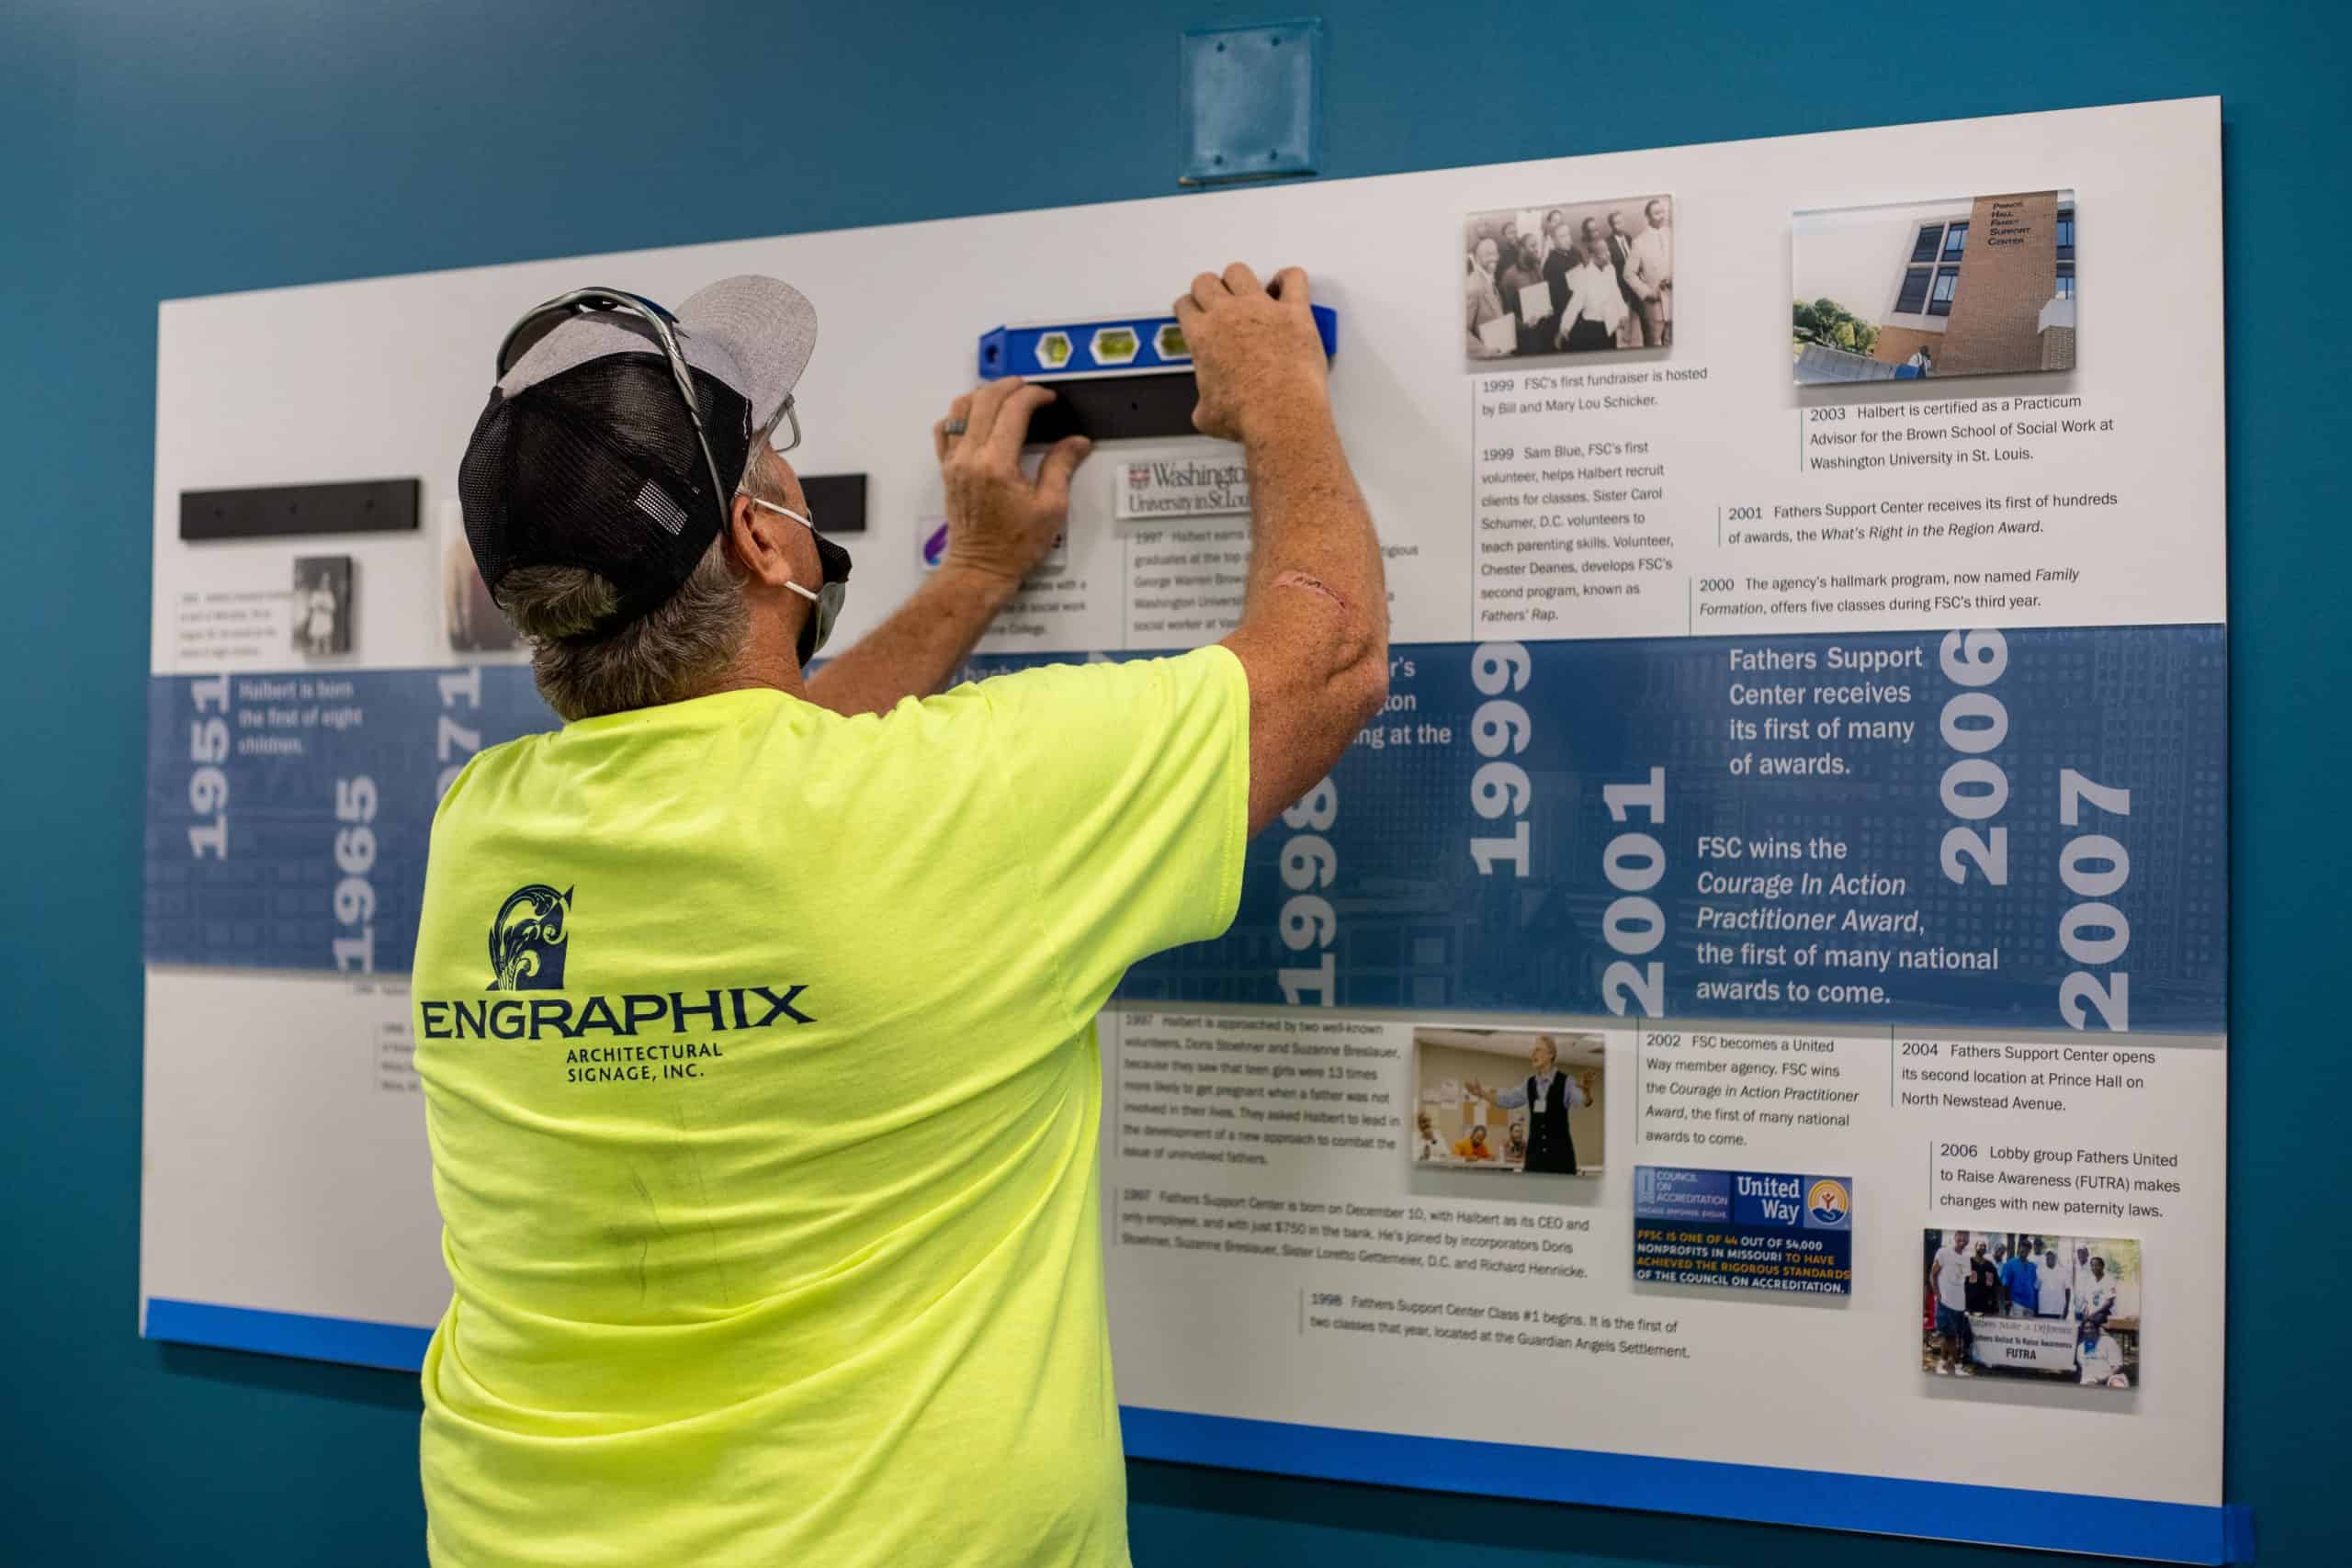 Engraphix team installing custom timeline wall made with dimensional elements